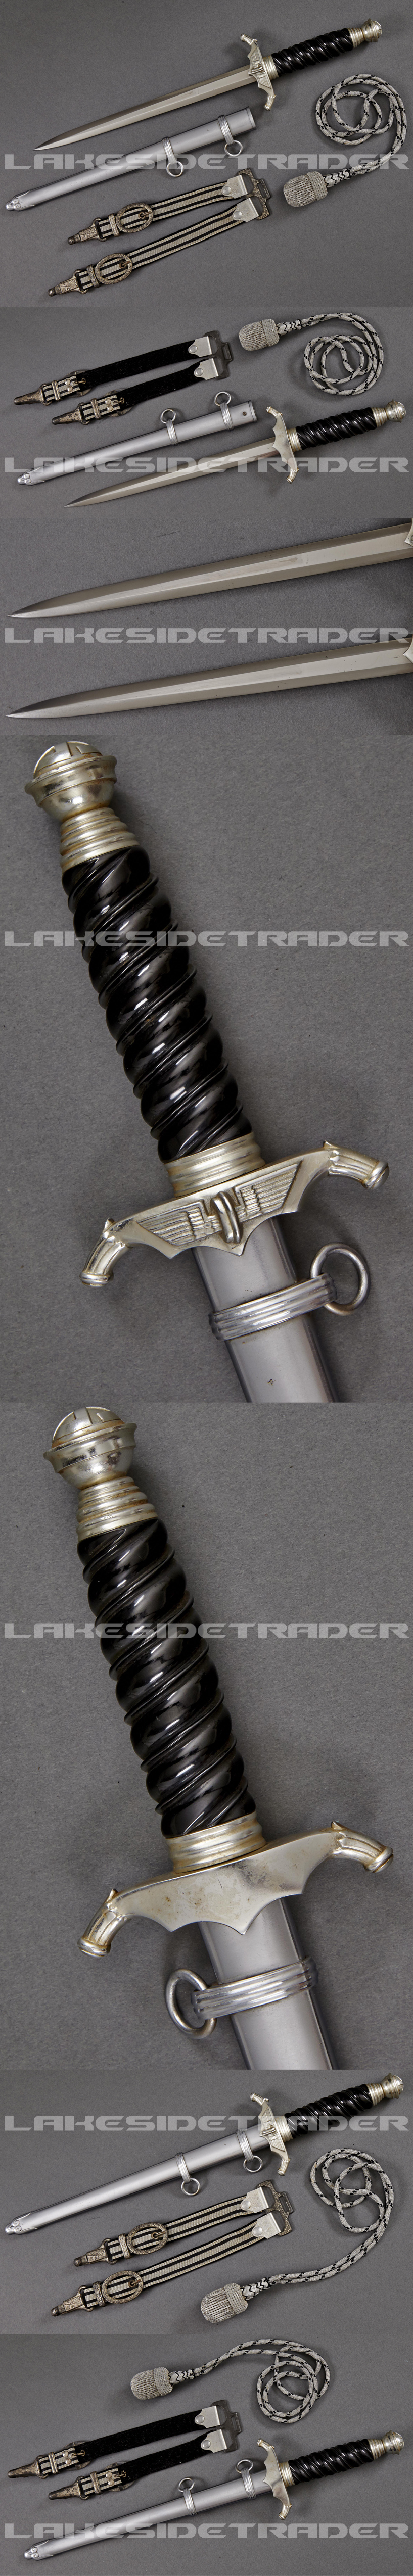 A Model 38 Railway Protection Dagger with Accoutrements